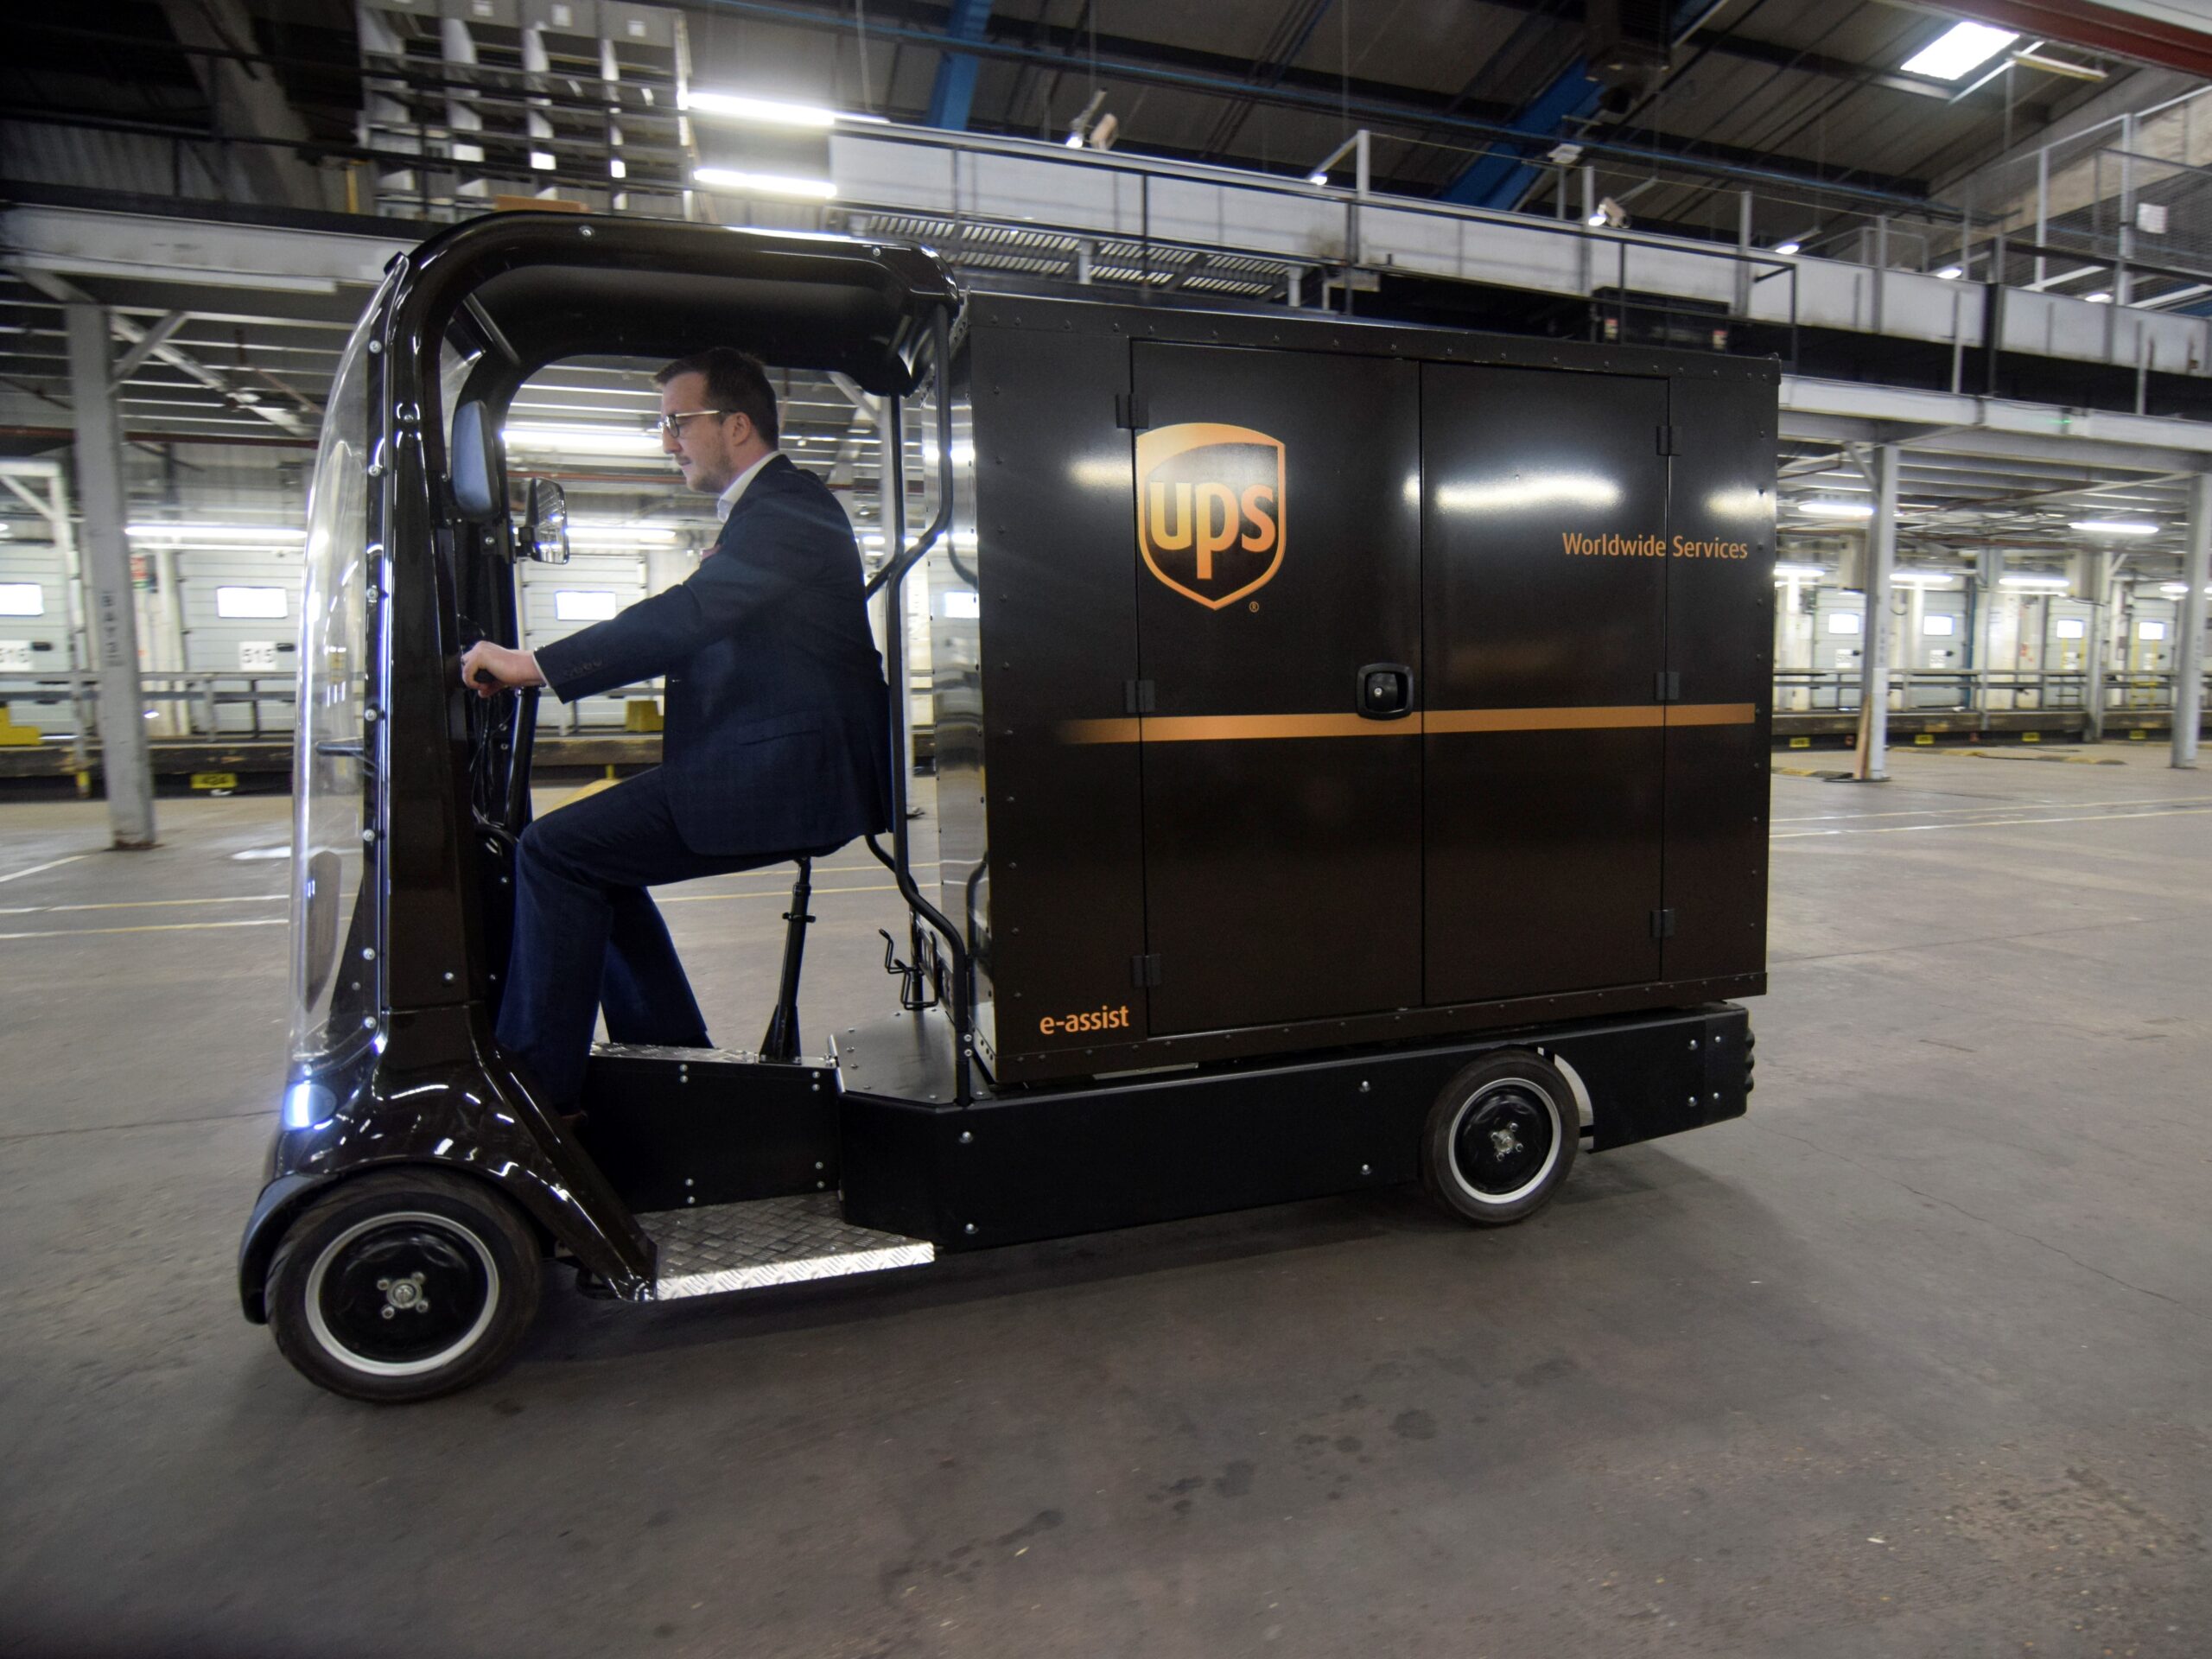 A white man in a suit drive a 4-wheeled brown cycle with the UPS logo on the side.